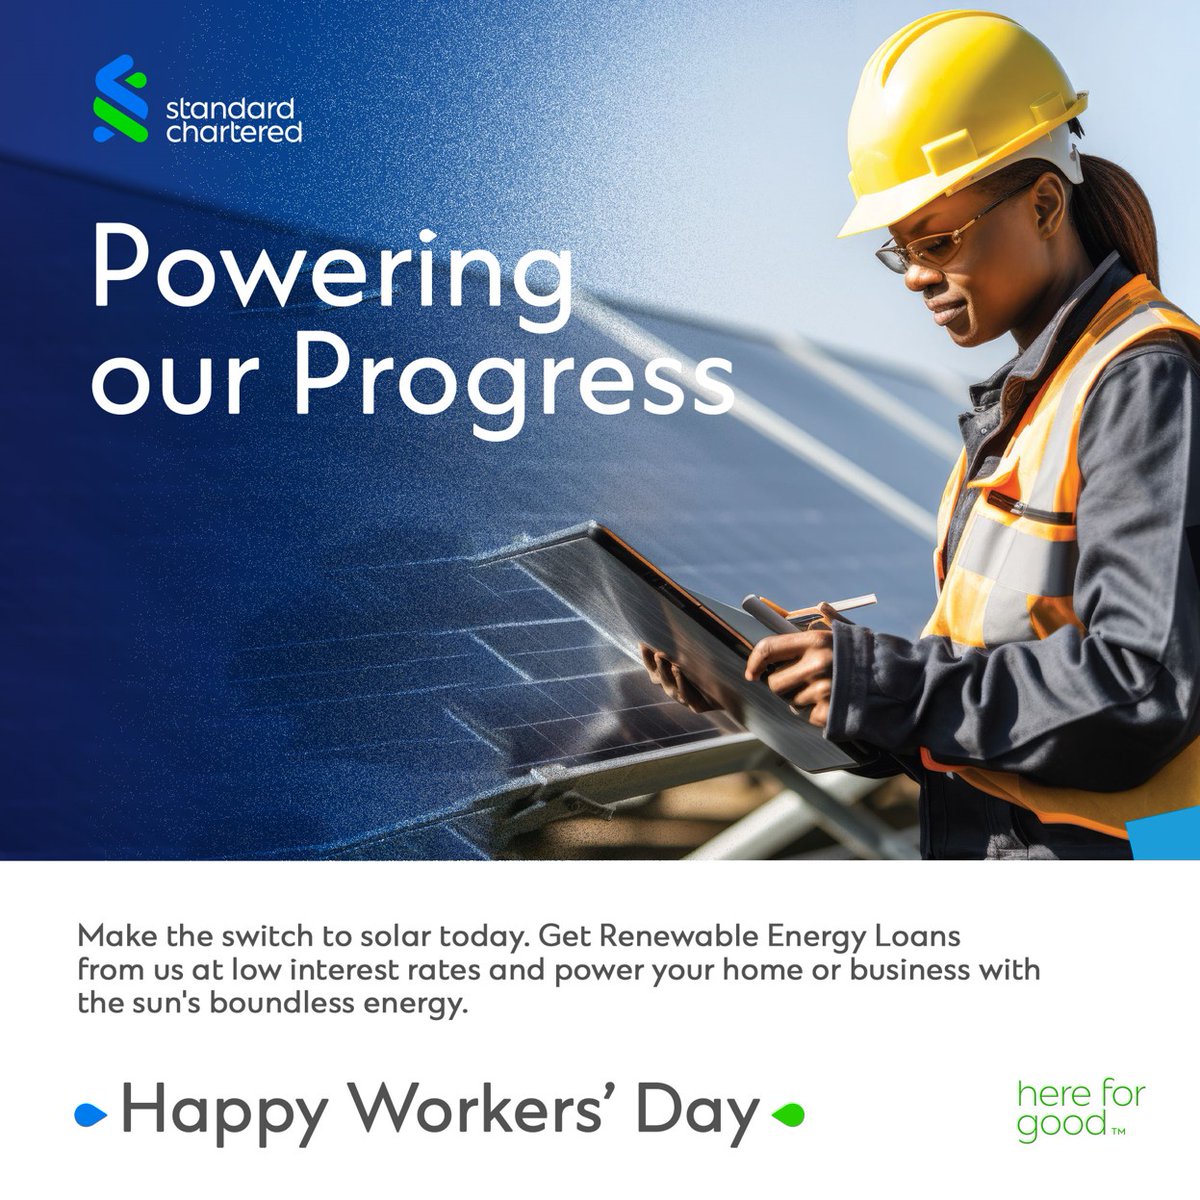 Power up your future this May Day! Make the switch to solar energy and light up your world with sustainable brilliance. Happy Workers’ Day! #StanChartGhana #HappyWorkersDay #RenewableEnergyLoans